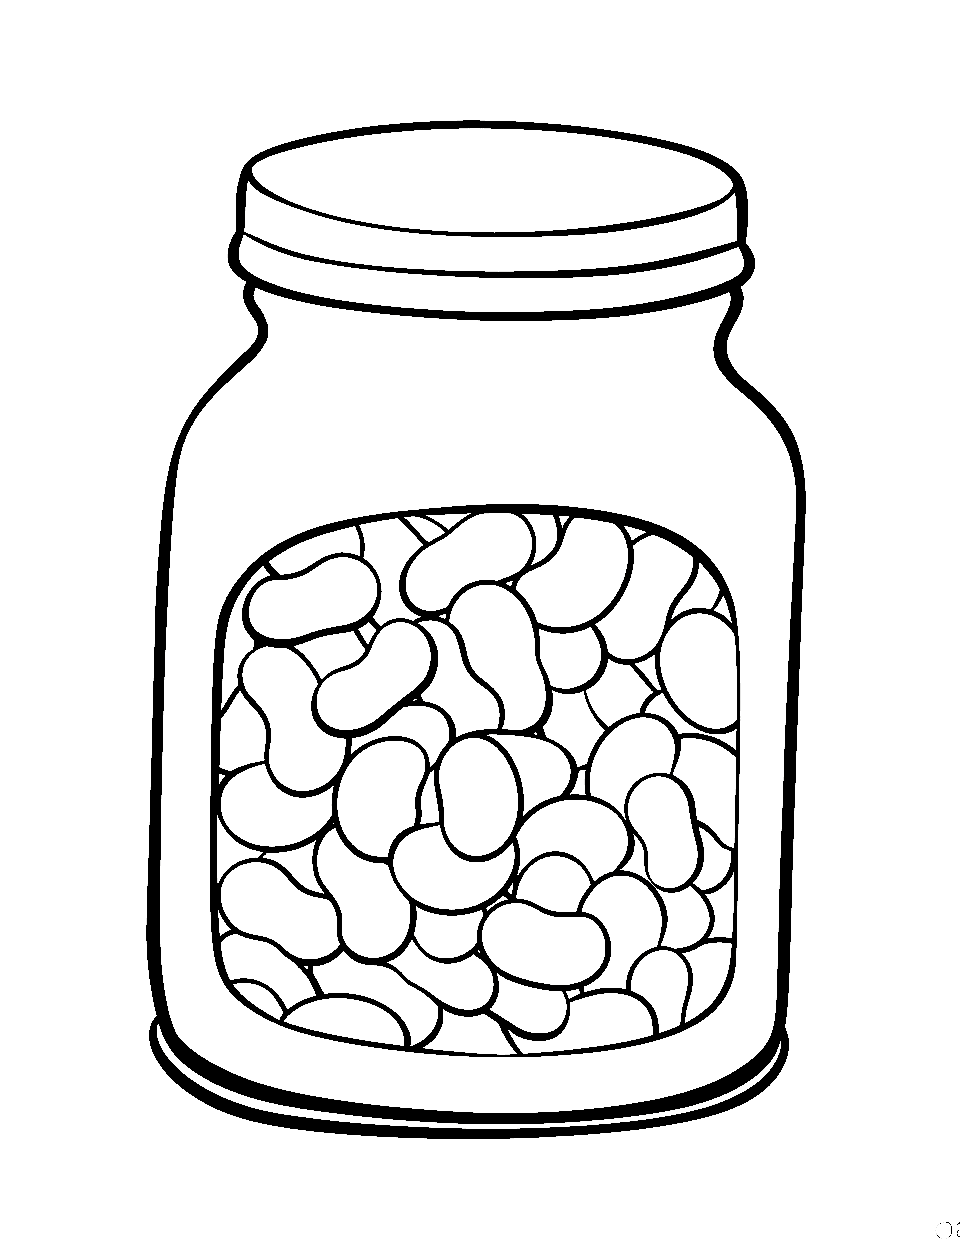 Jellybean Joy Coloring Page - A jar filled with jellybeans ready to be colored in.